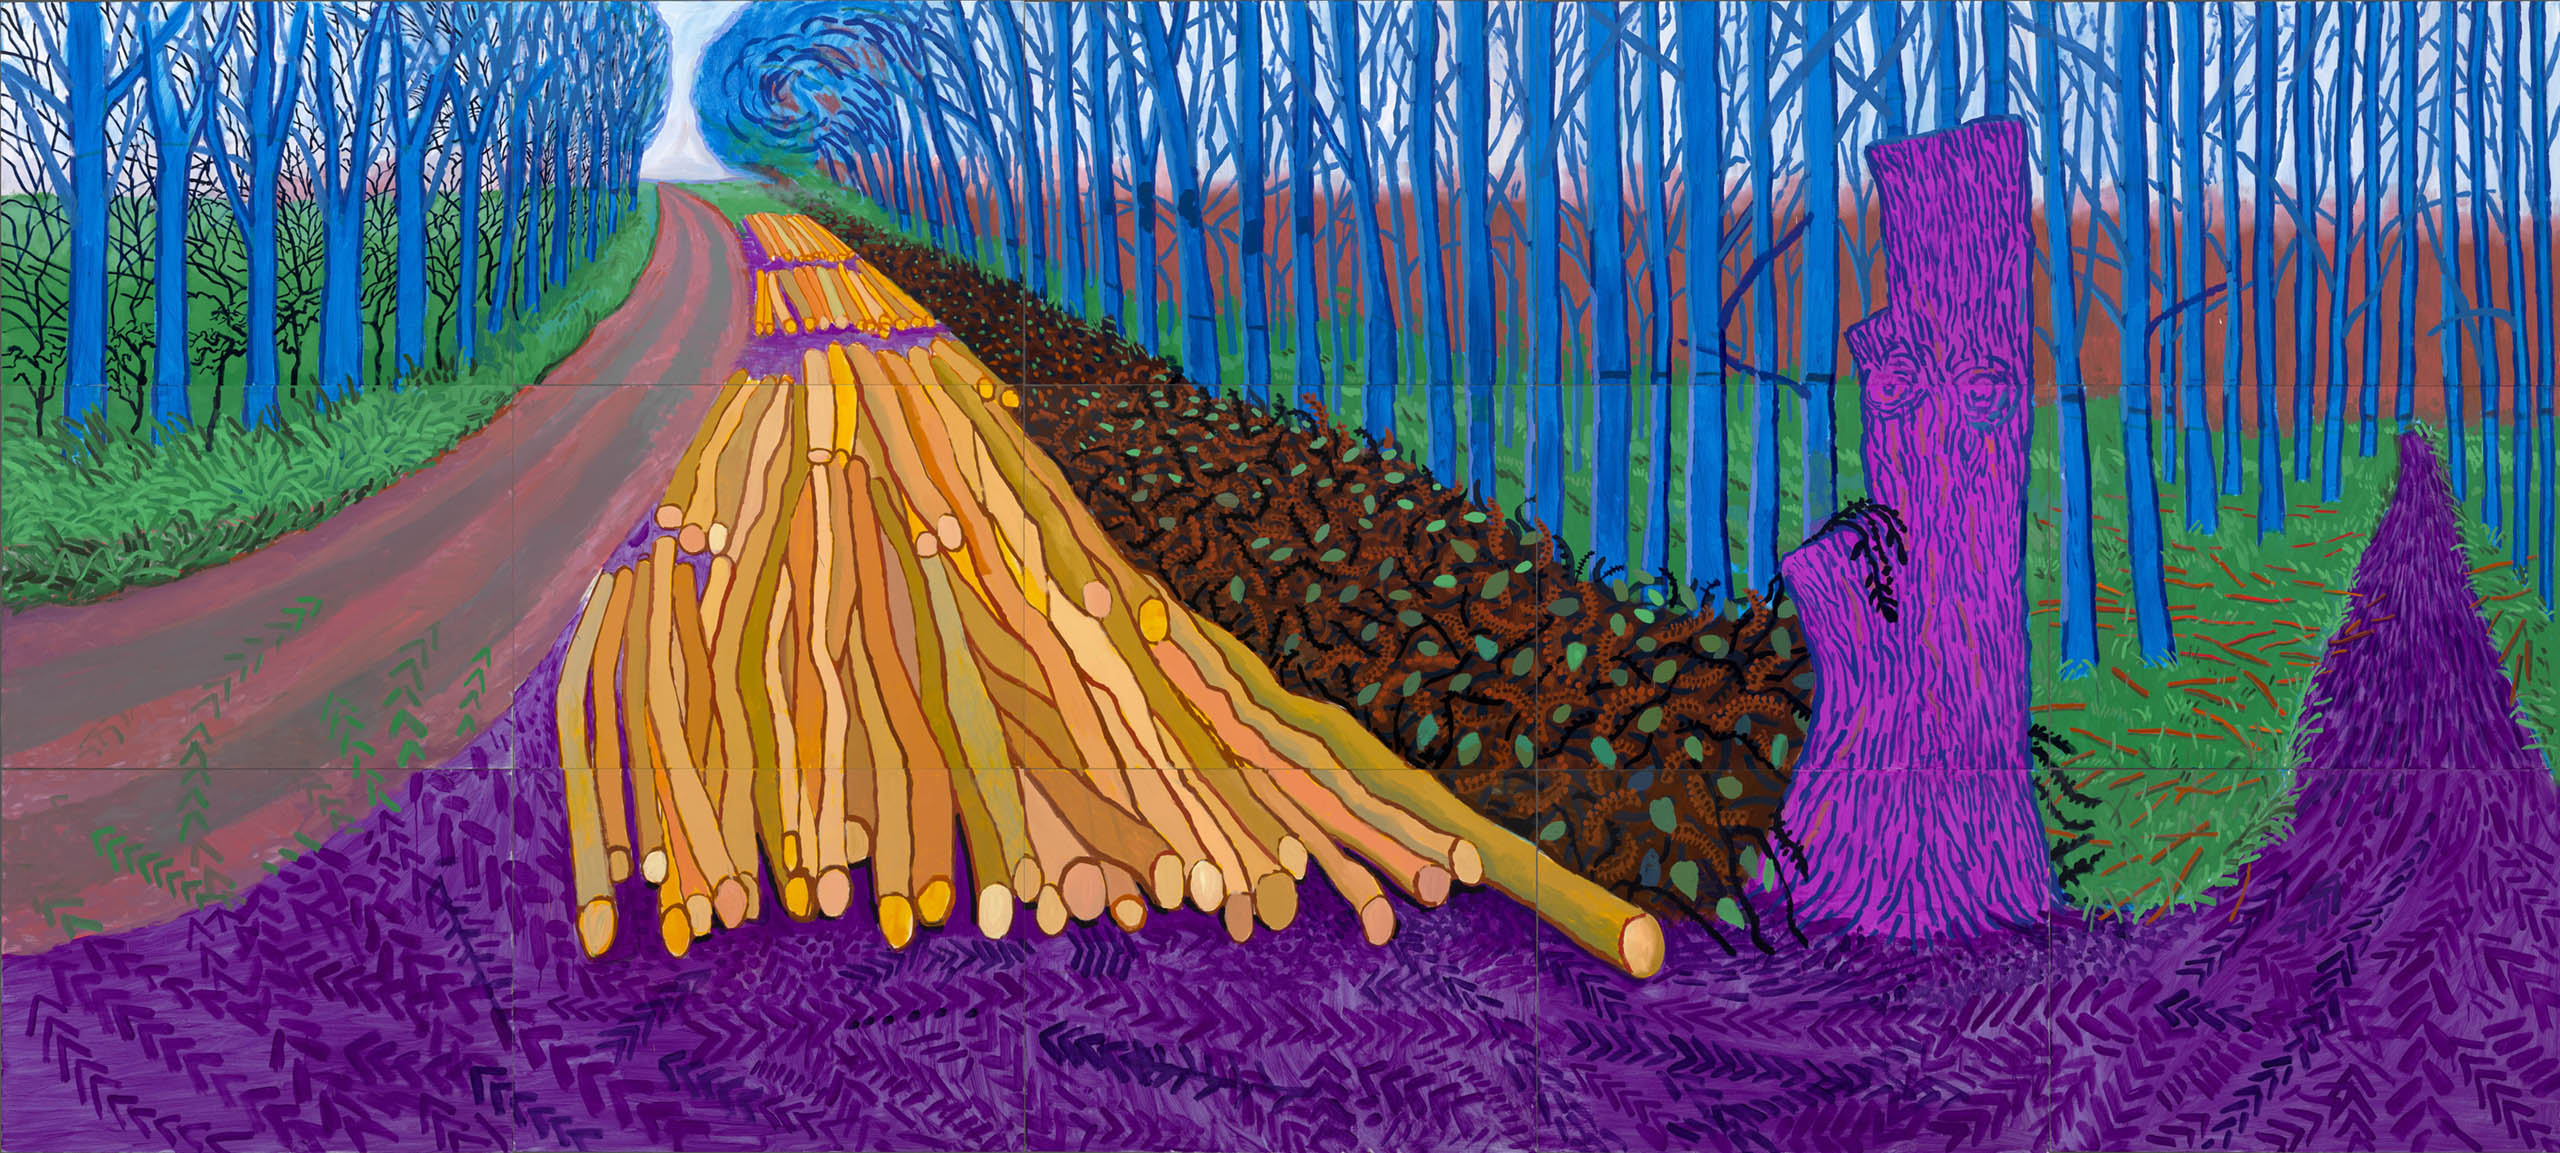 "WINTER TIMBER" 2009 OIL ON 15 CANVASES (36 X 48" EACH) 108 X 240" Â©Â DAVID HOCKNEY PHOTO CREDIT: JONATHAN WILKINSON